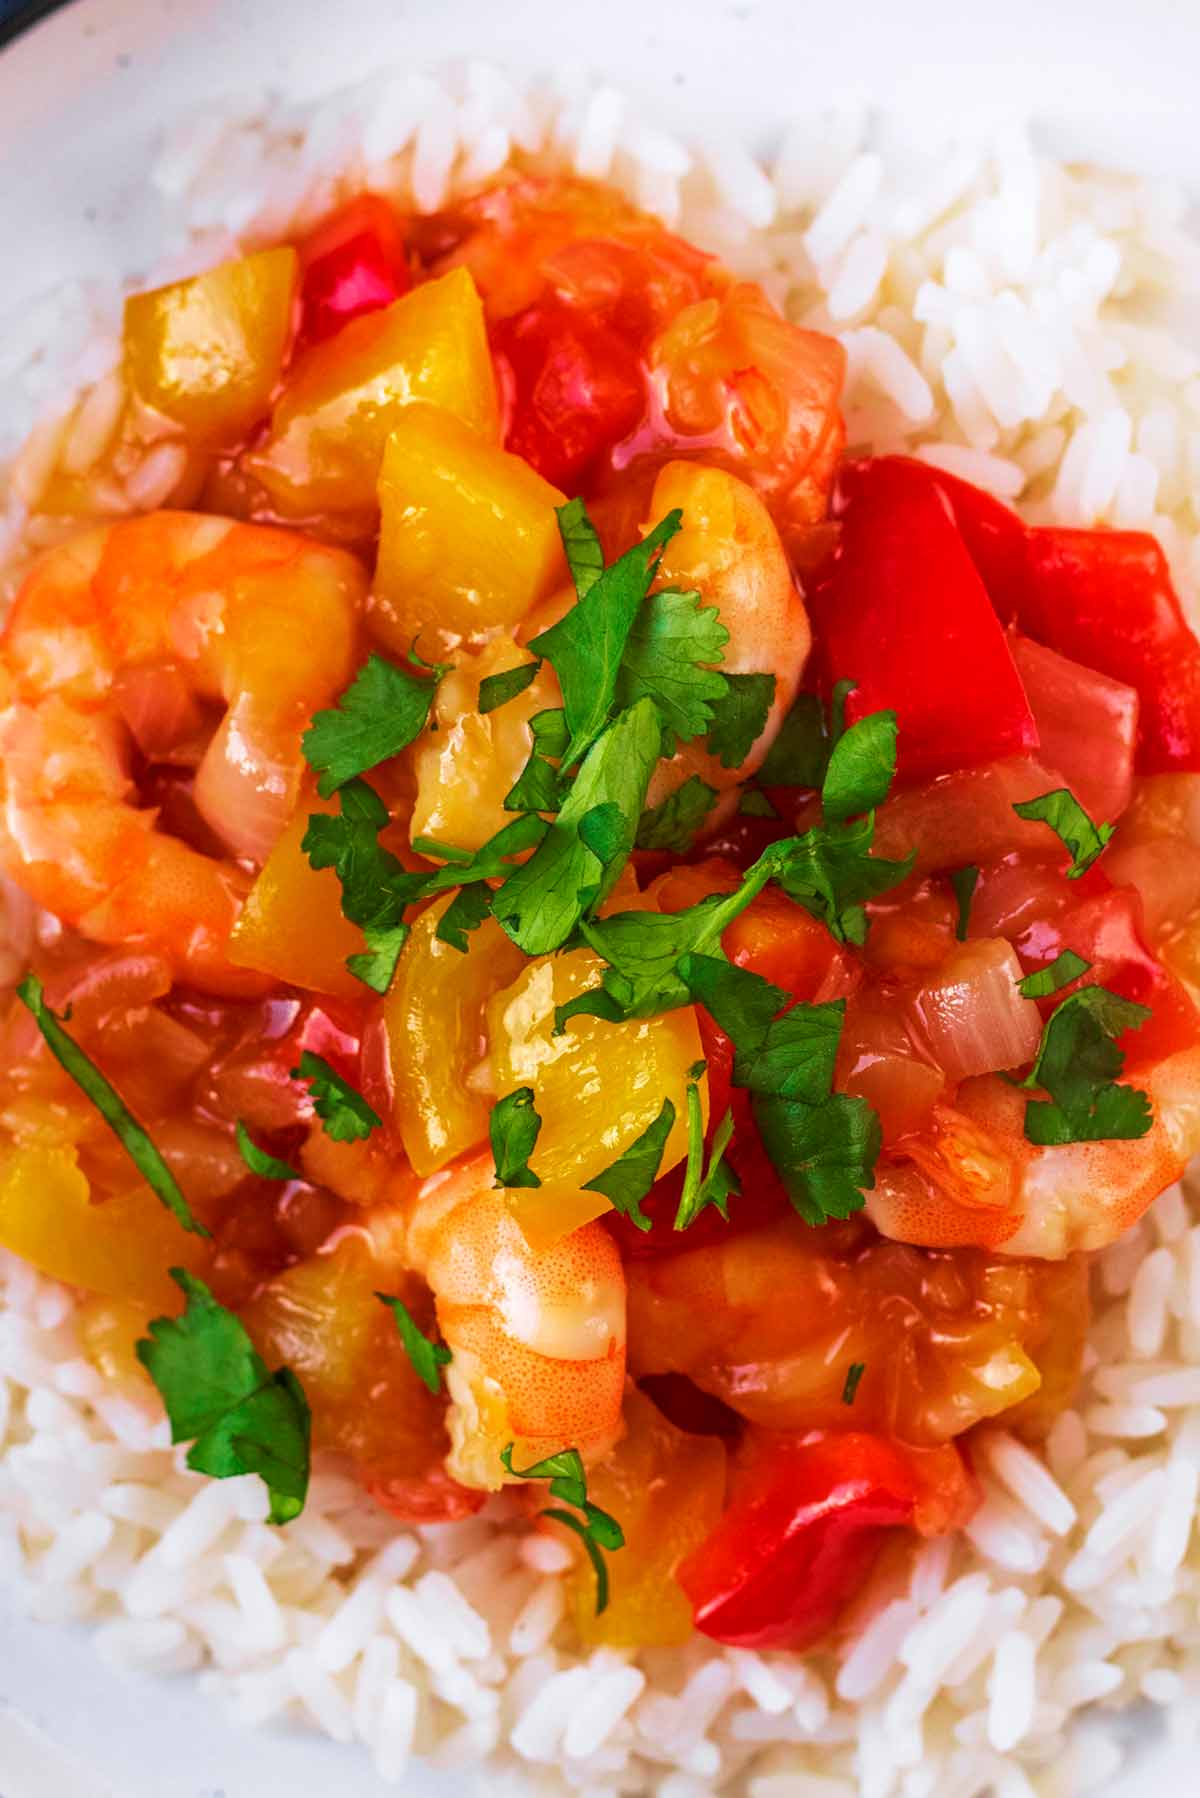 Sweet and sour prawns topped with cilantro leaves on a bed of rice.